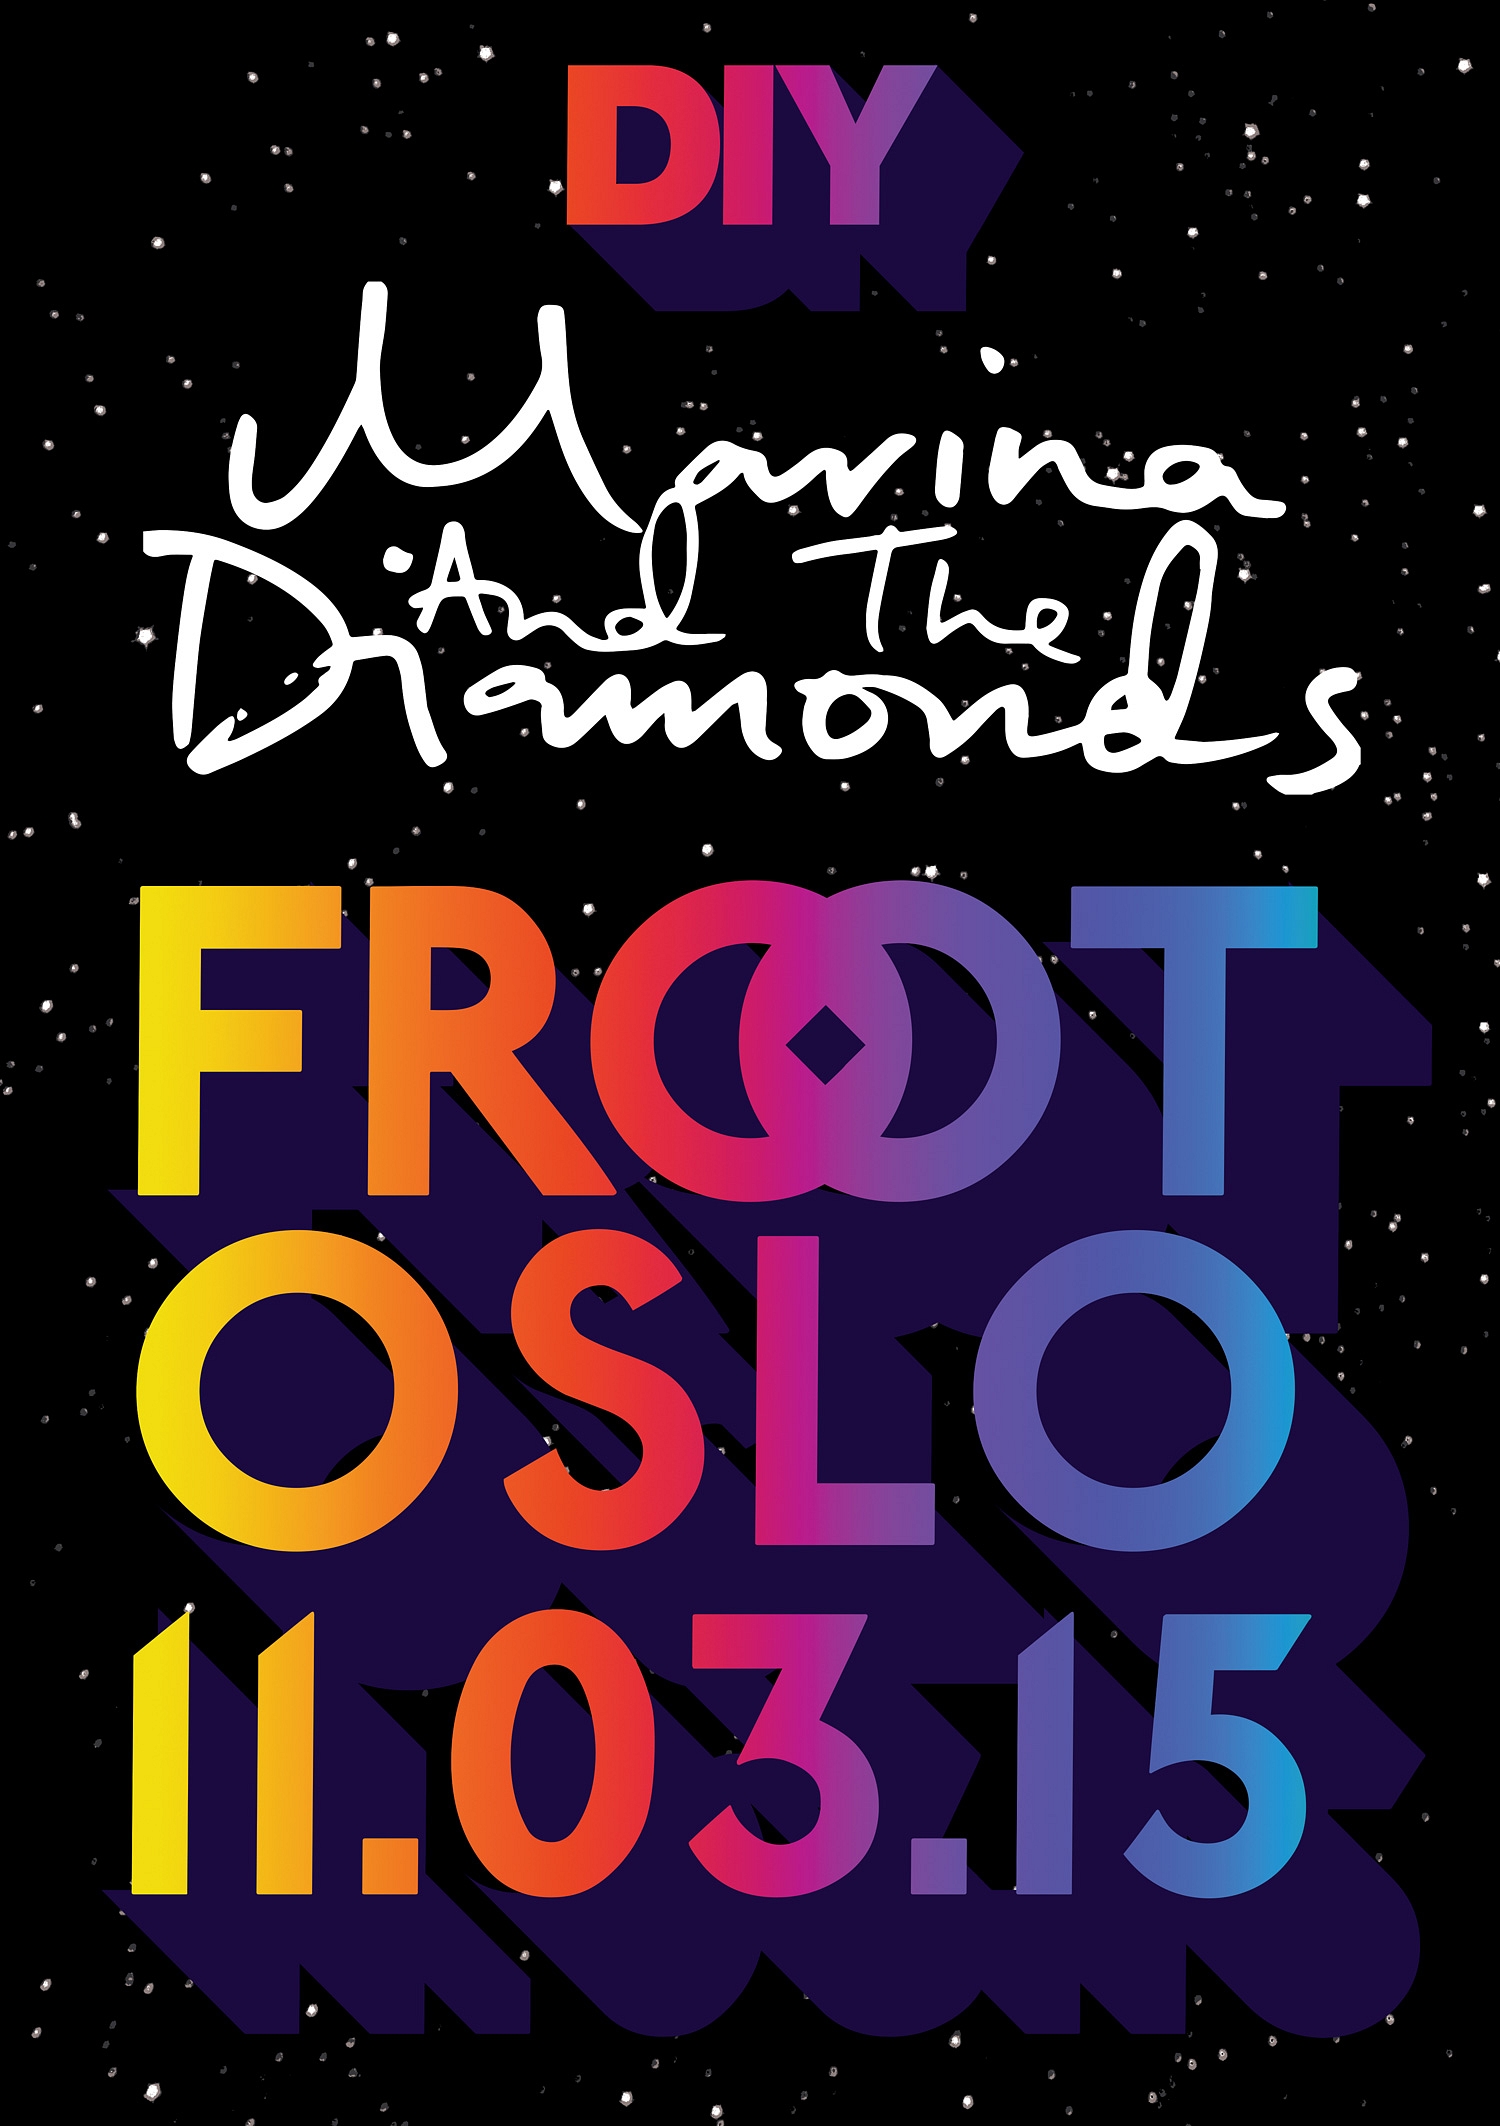 Marina and the Diamonds announces one-off intimate DIY Presents show